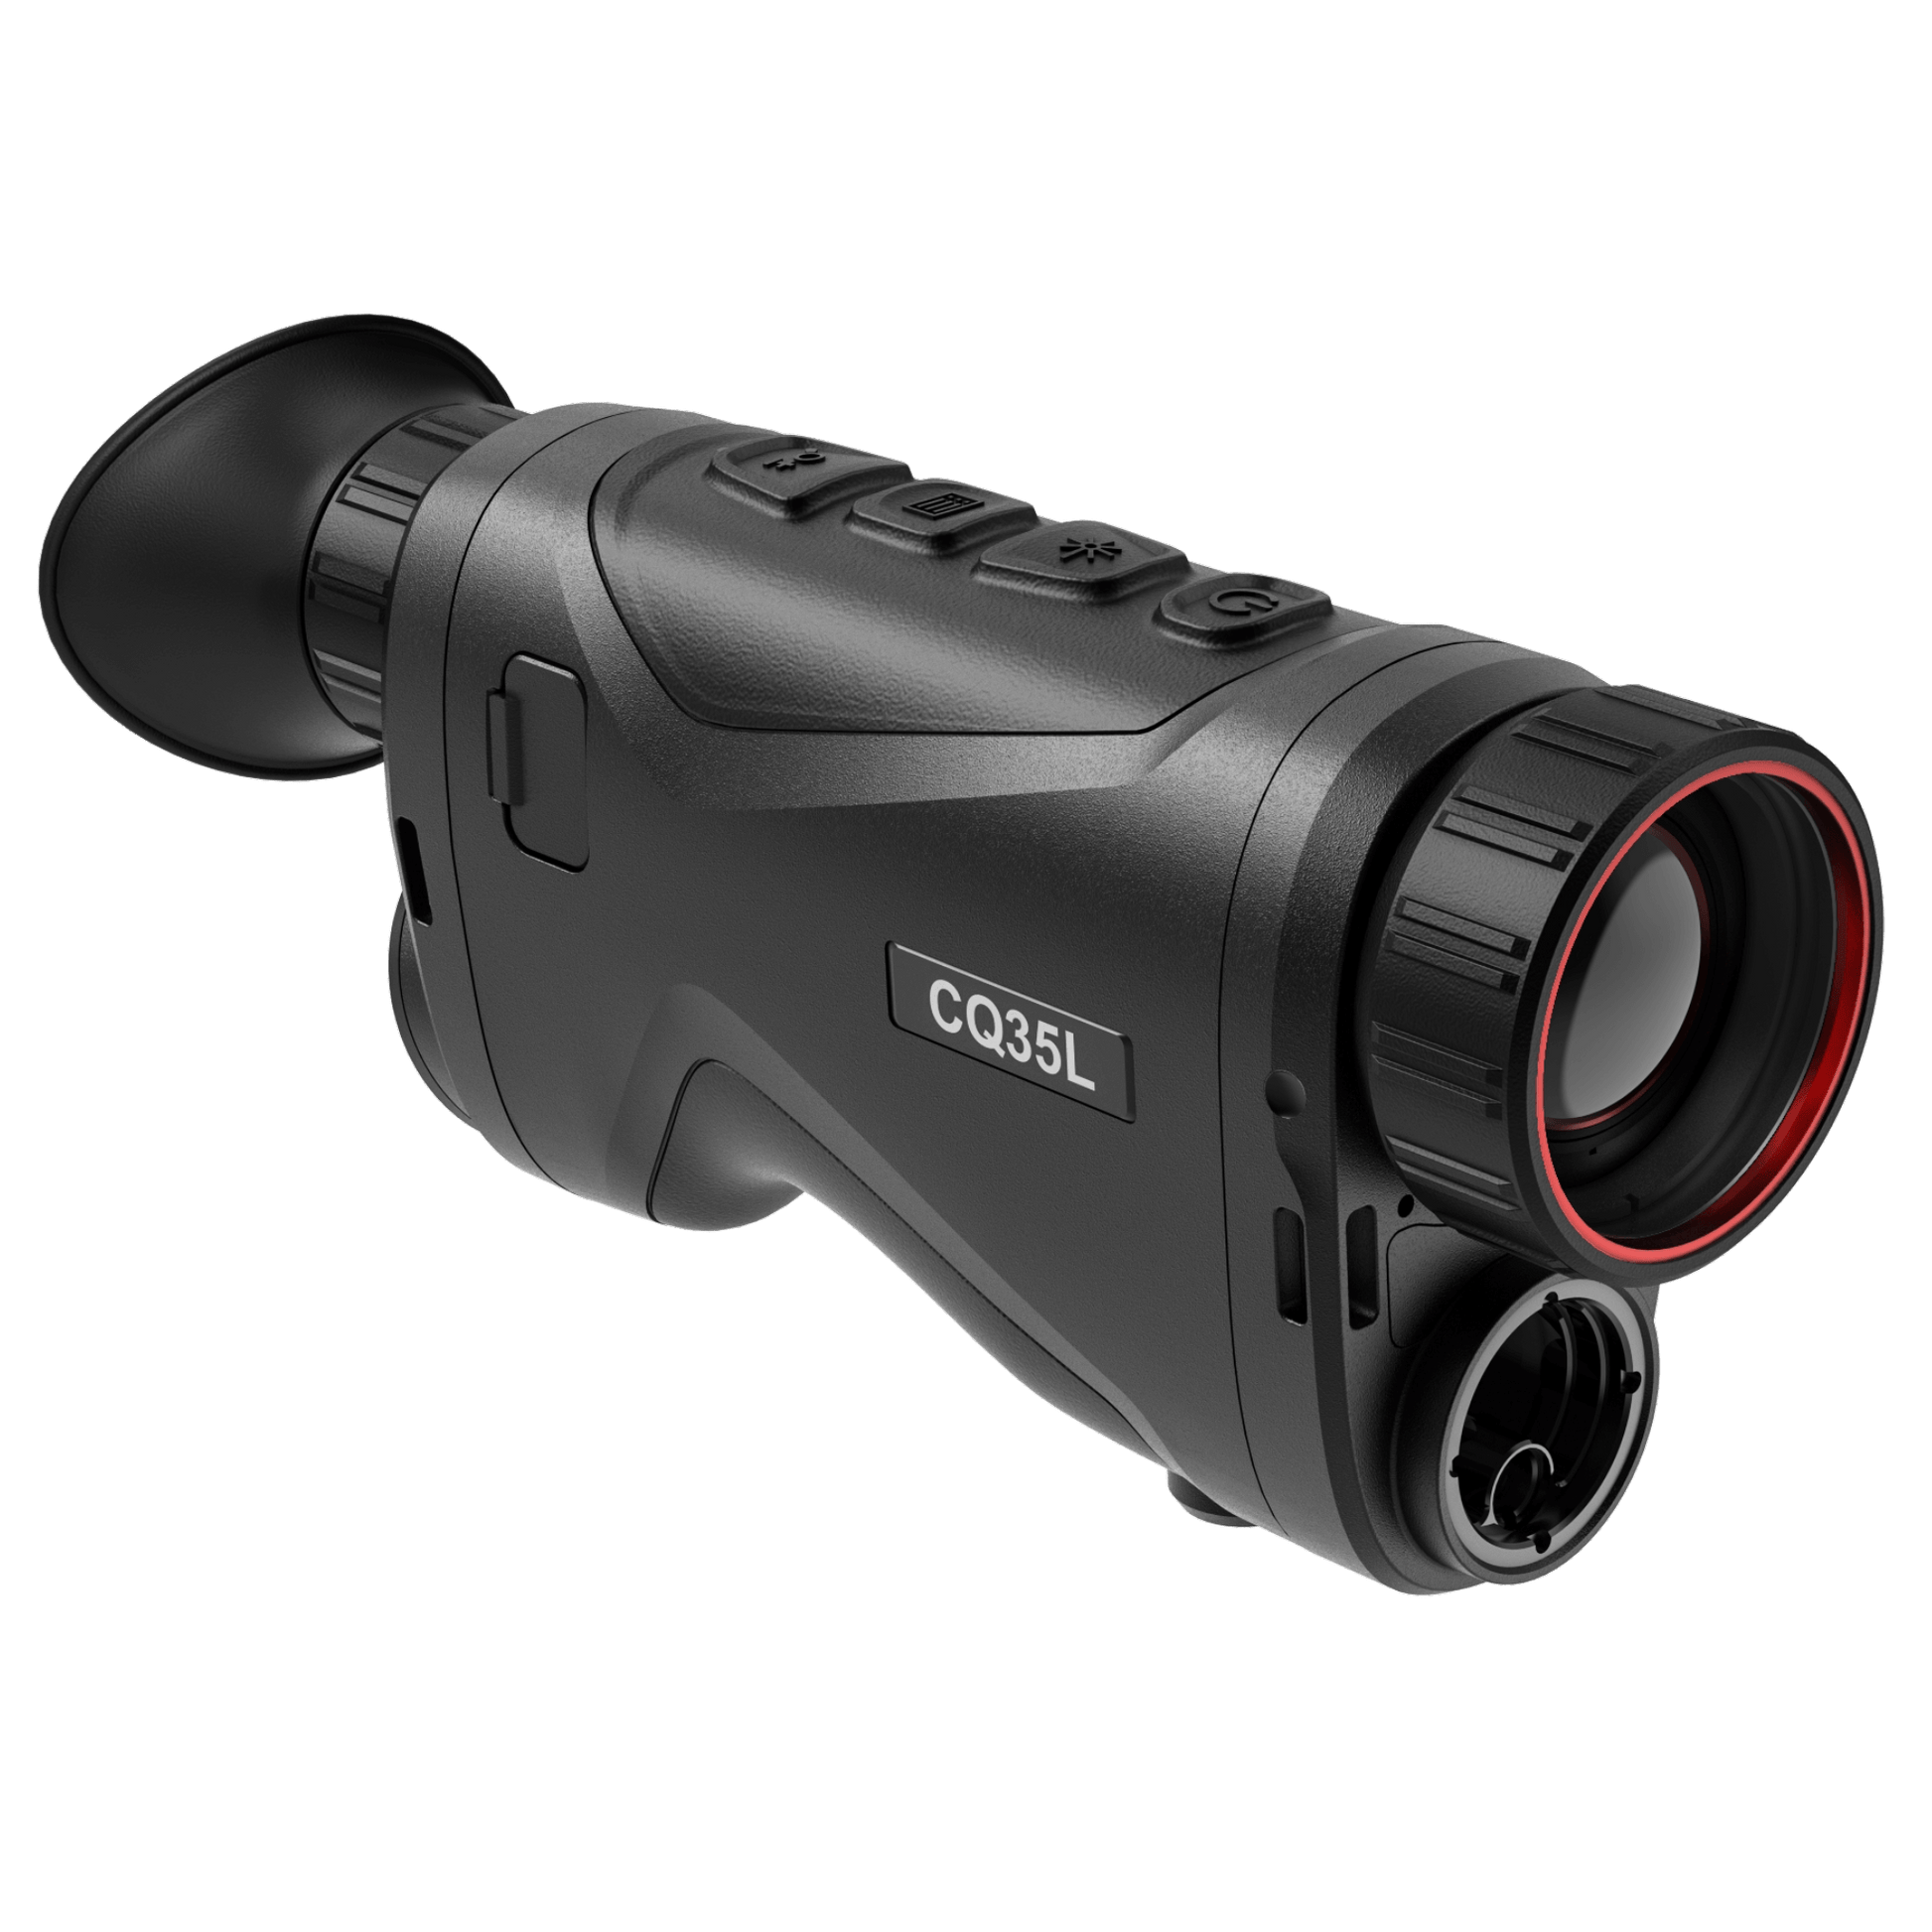 Front view of the CQ35L thermal monocular, showcasing its germanium lens circled in red and the adjacent laser rangefinder.  Distinctive tactile buttons are positioned on top, and the model "CQ35L" is clearly labeled on the side. The robust black casing features contoured grips for user comfort.